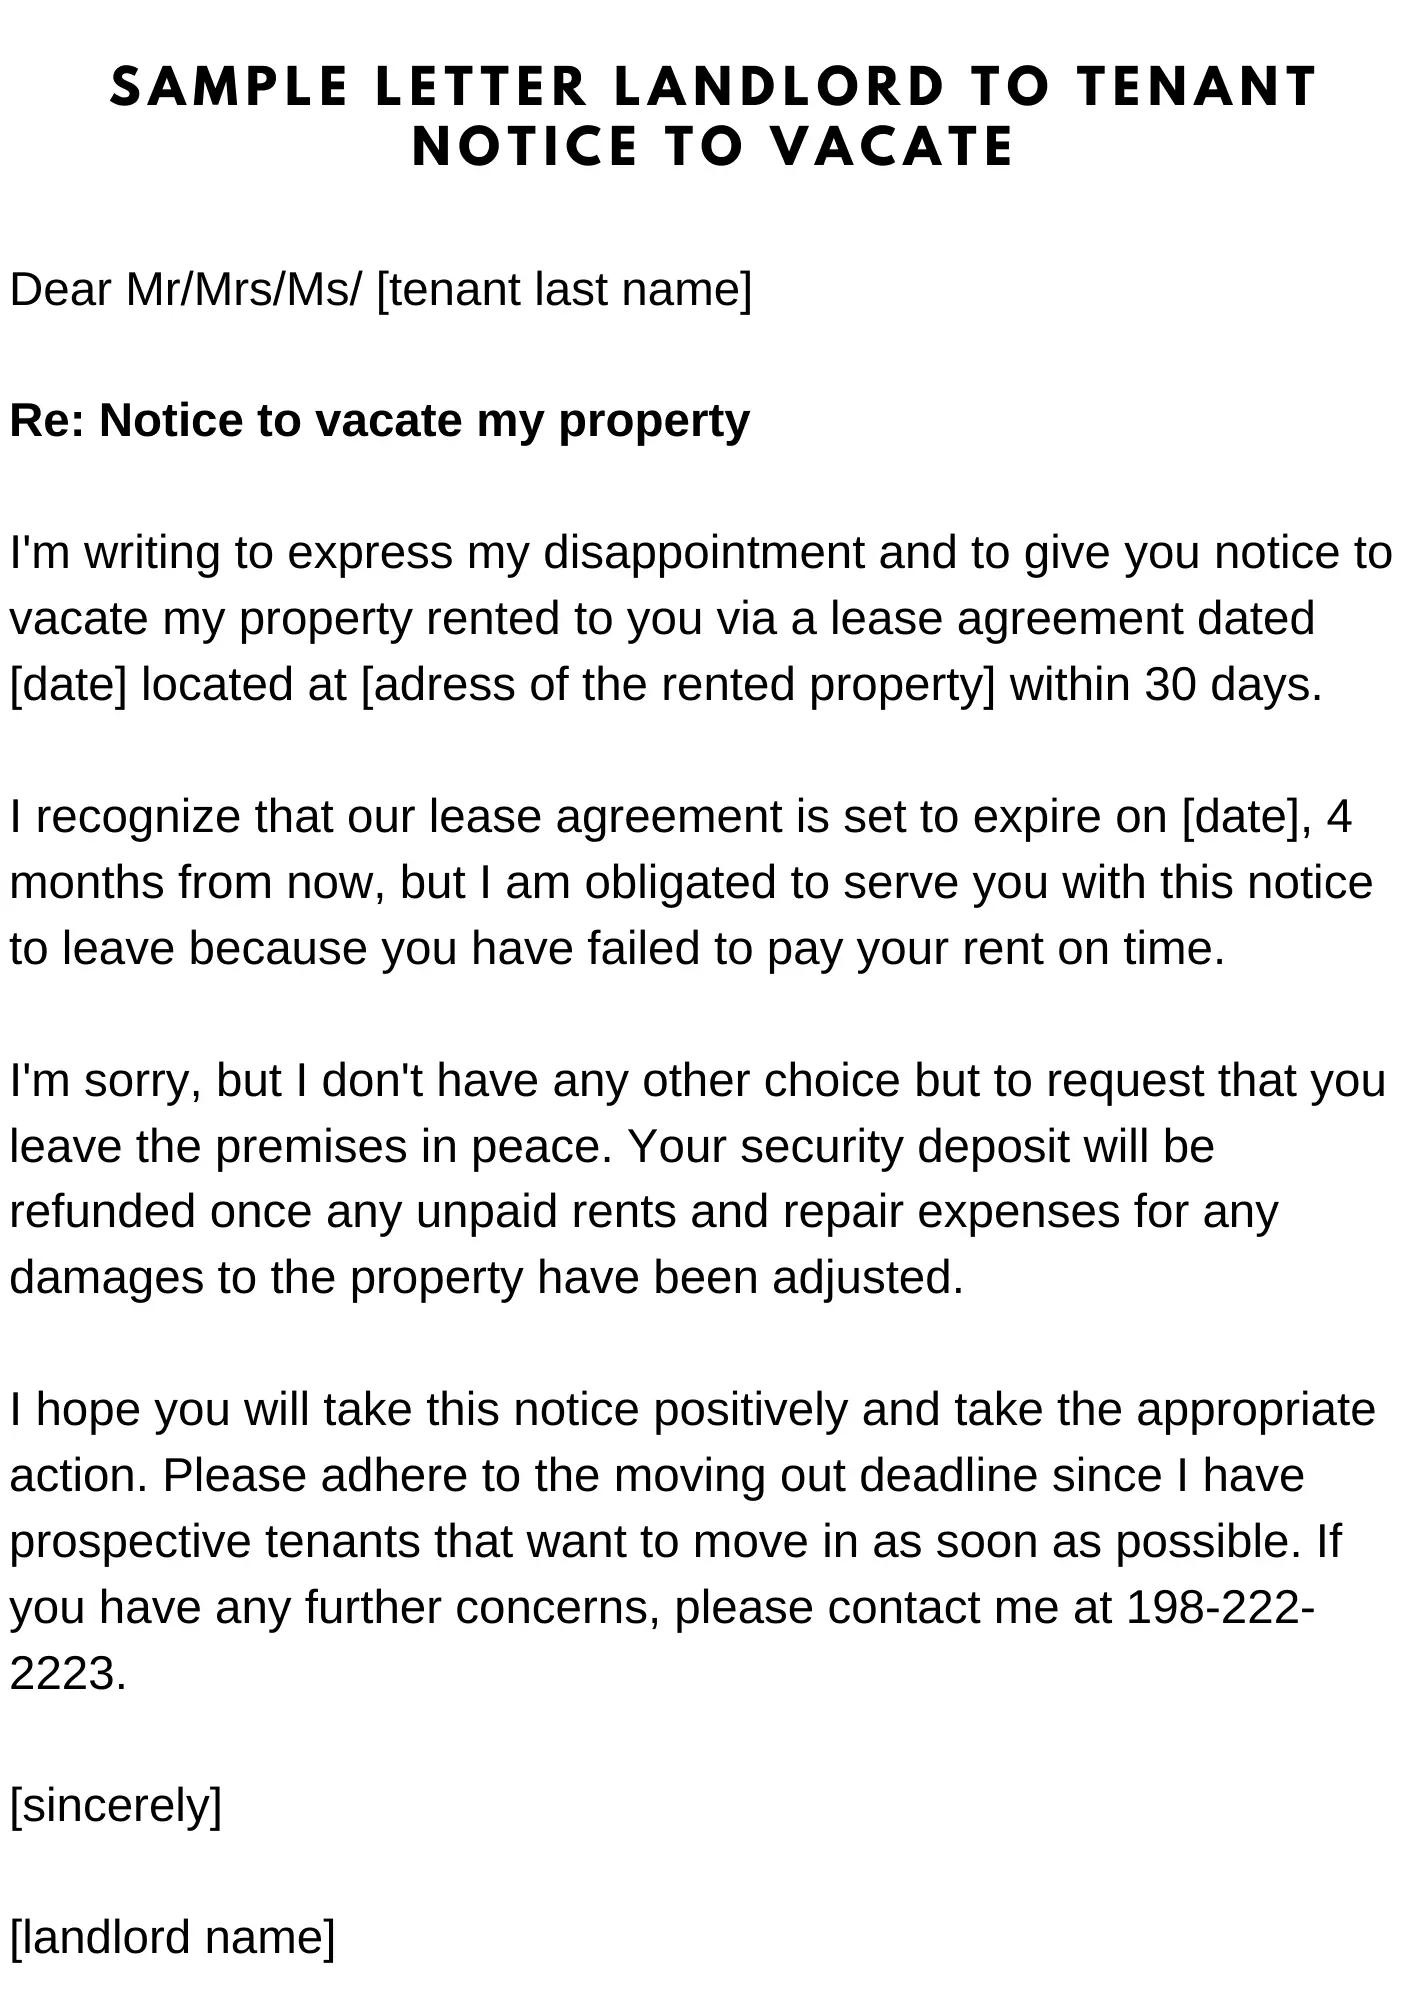 notice to landlord to vacate sample letter